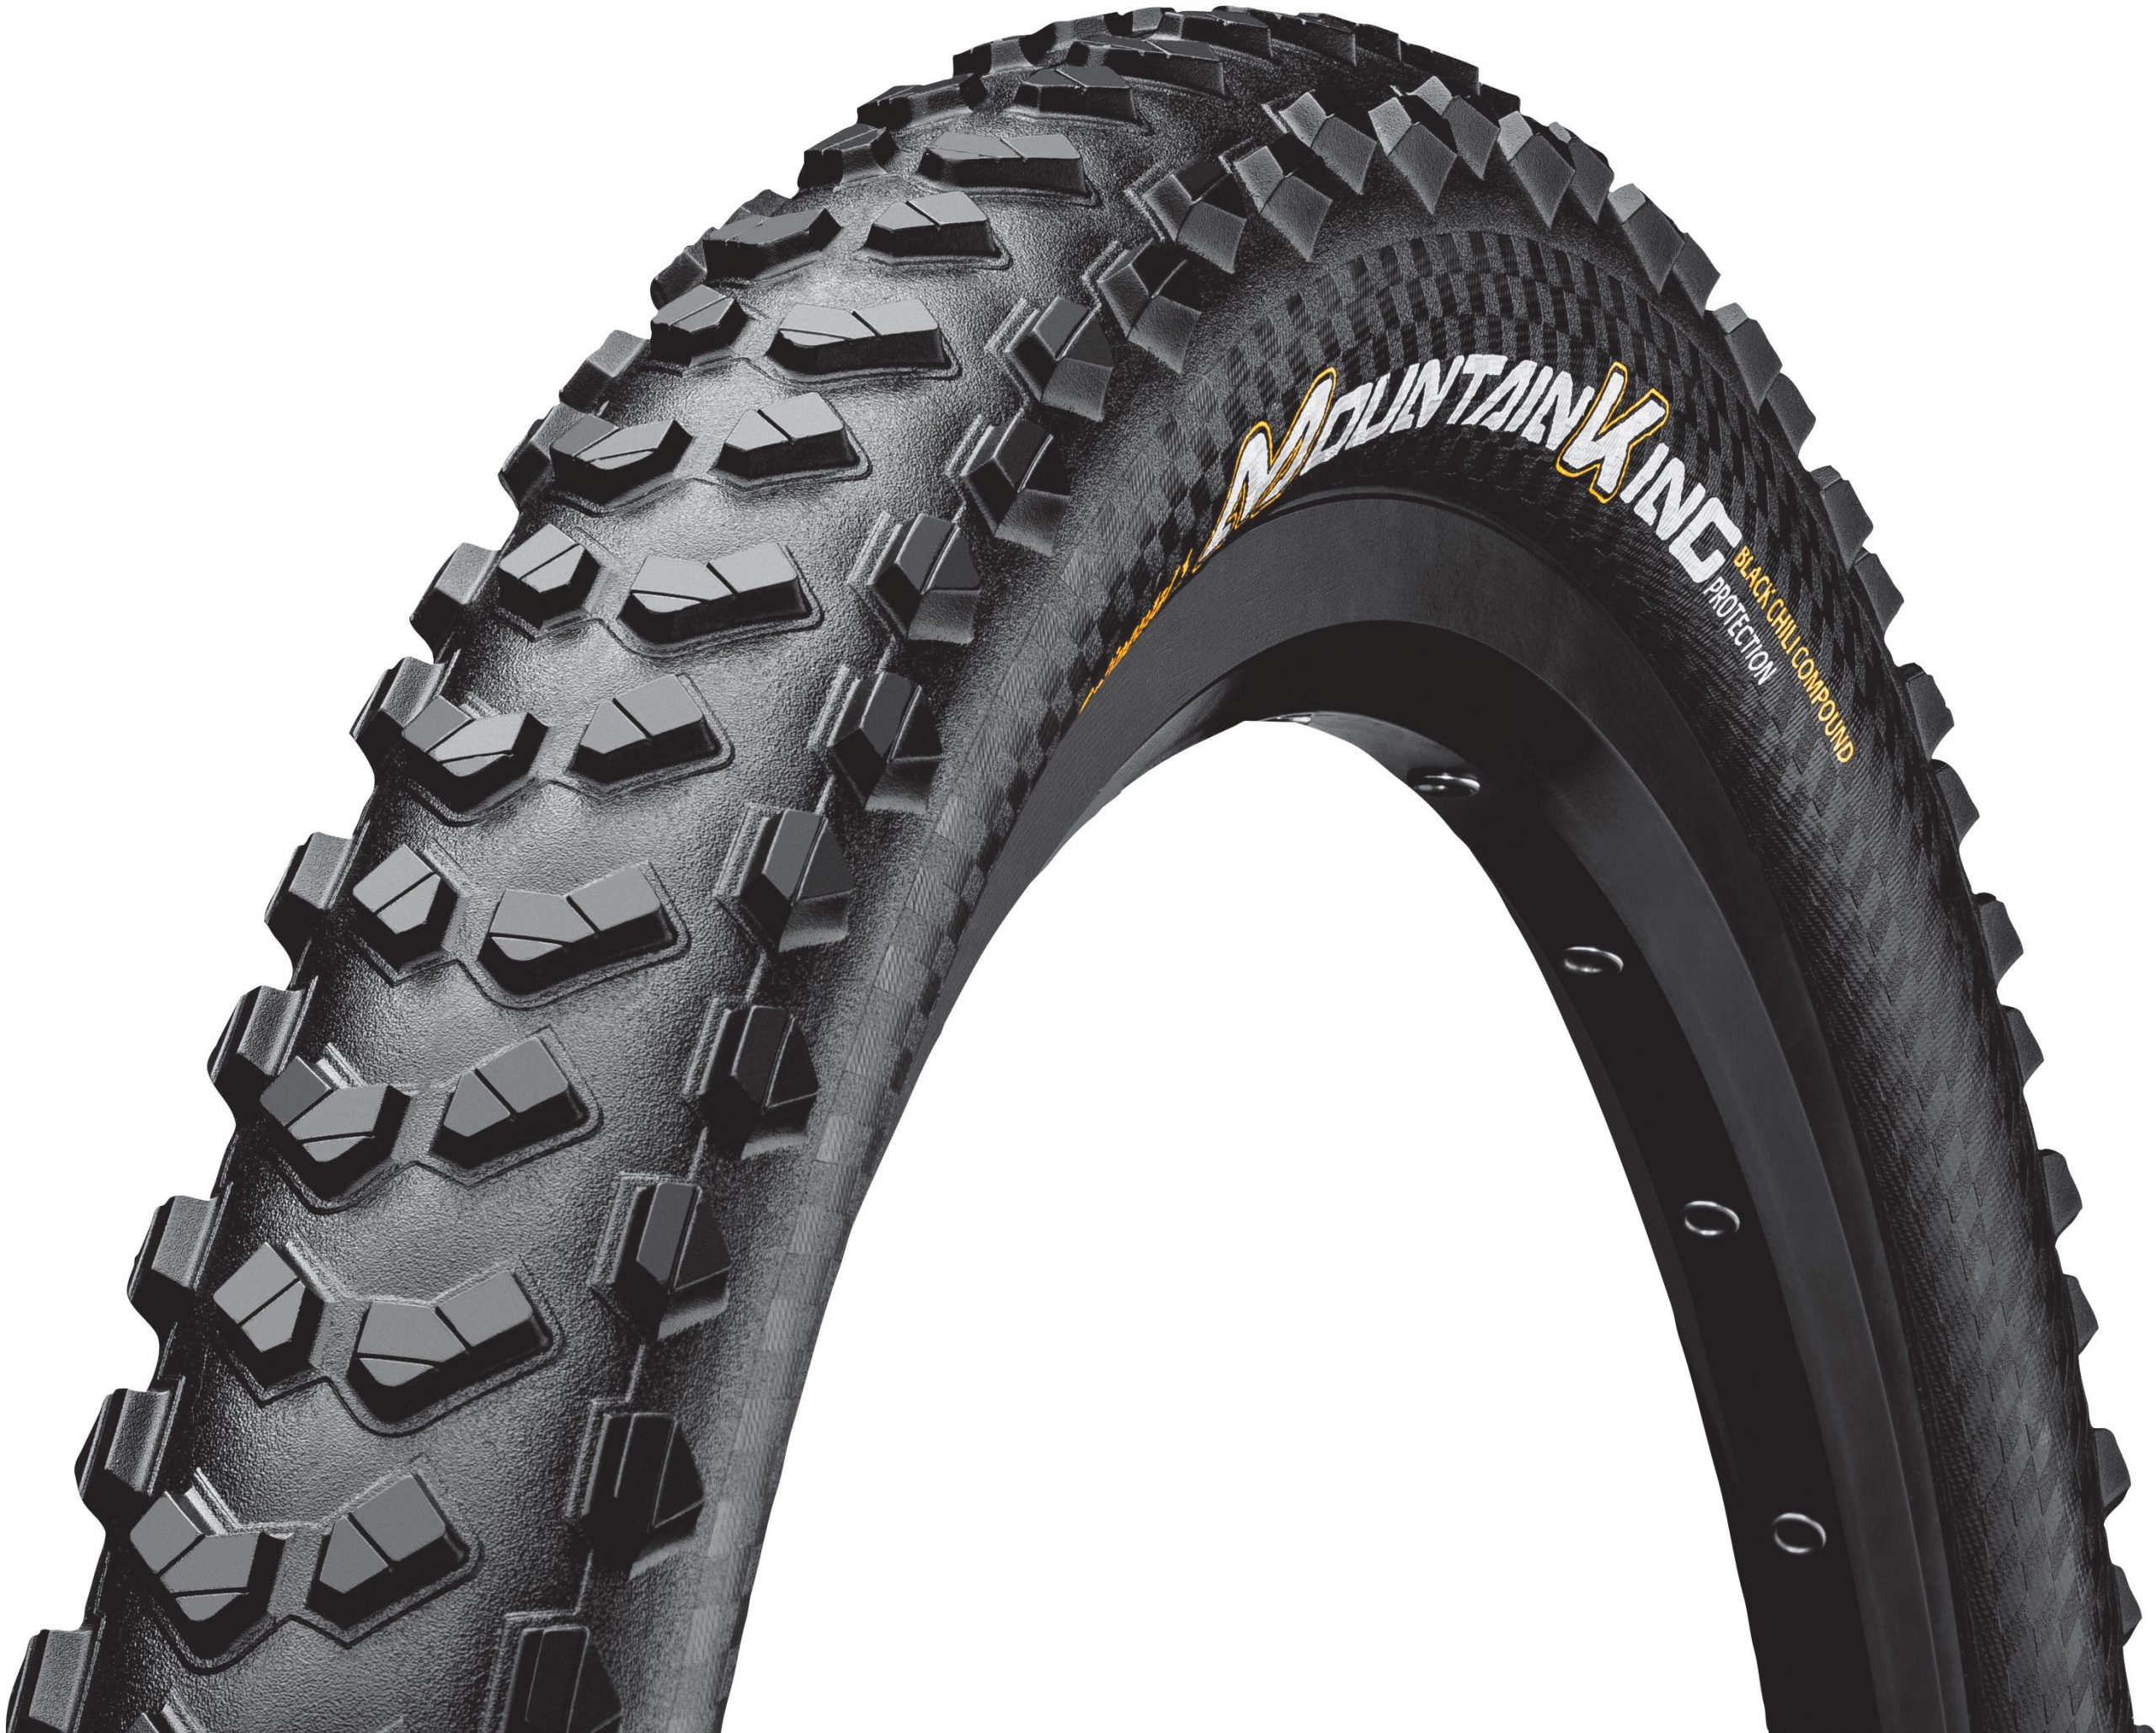 Continental Mountain King Folding MTB Tyre - ProTection continental mountain king folding mtb tyre protection scaled